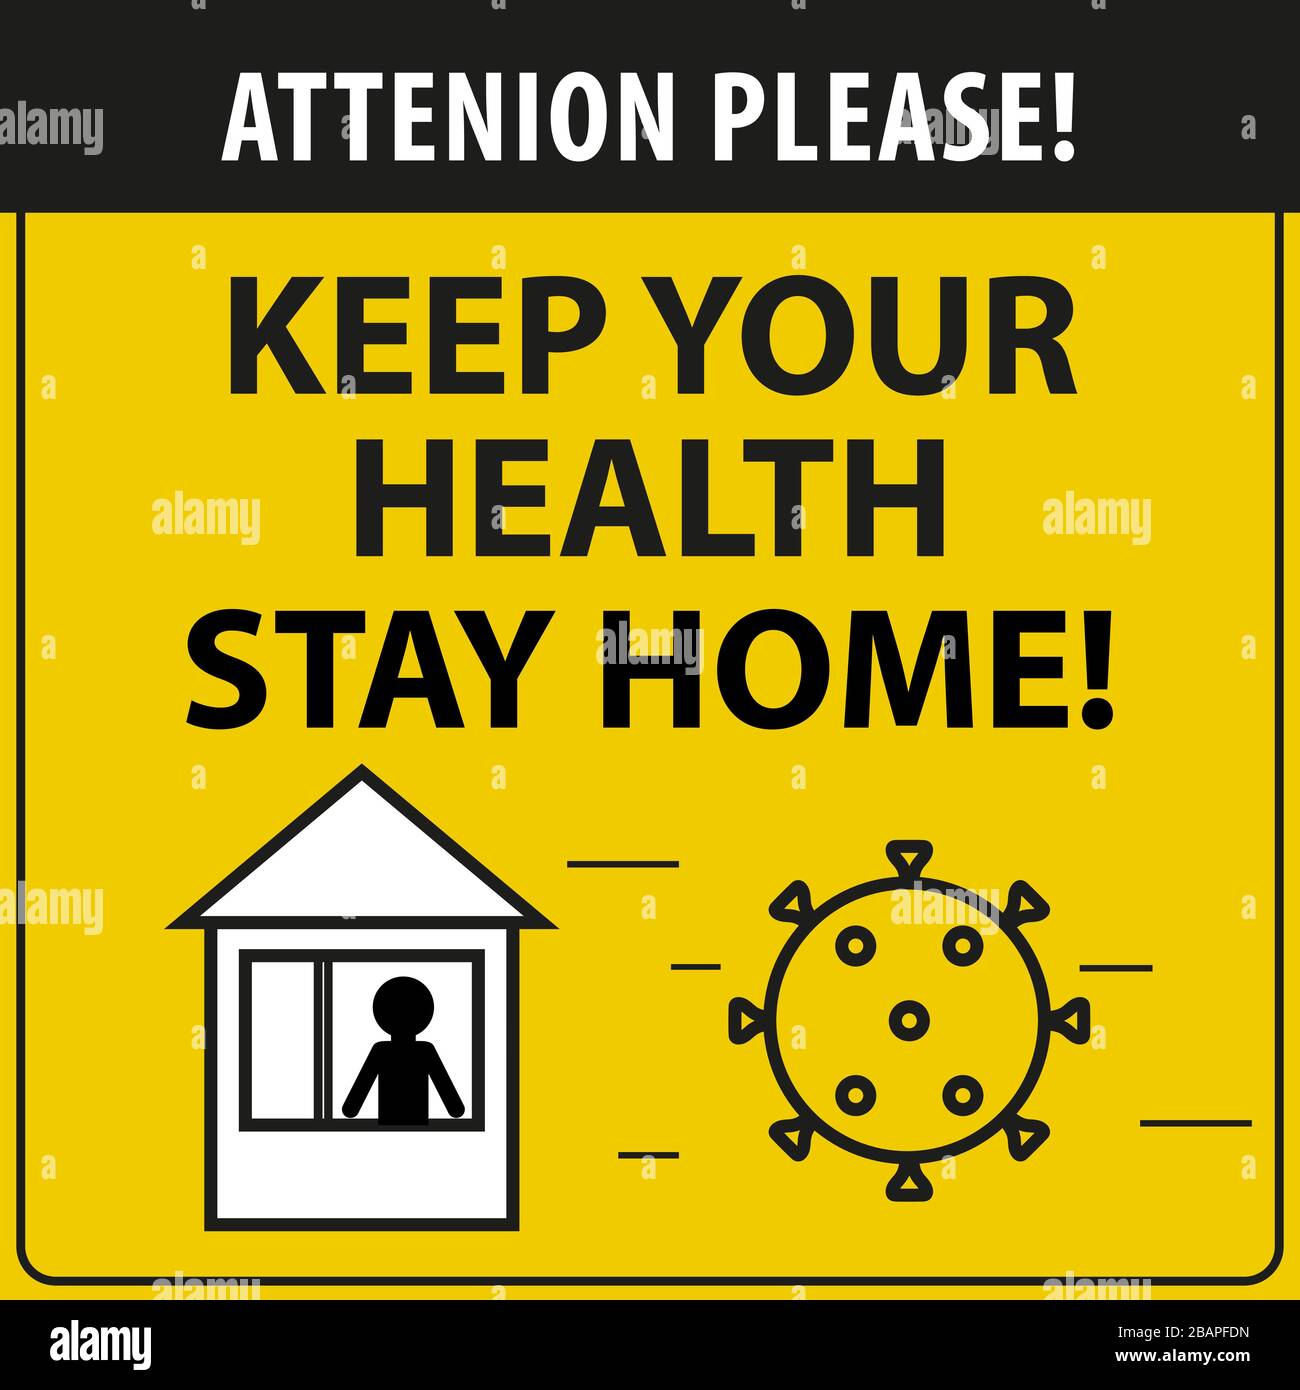 Coronavirus sign. Attenion please. Keep your health stay home. Information warning sign about quarantine. Vecotr illustration Stock Vector